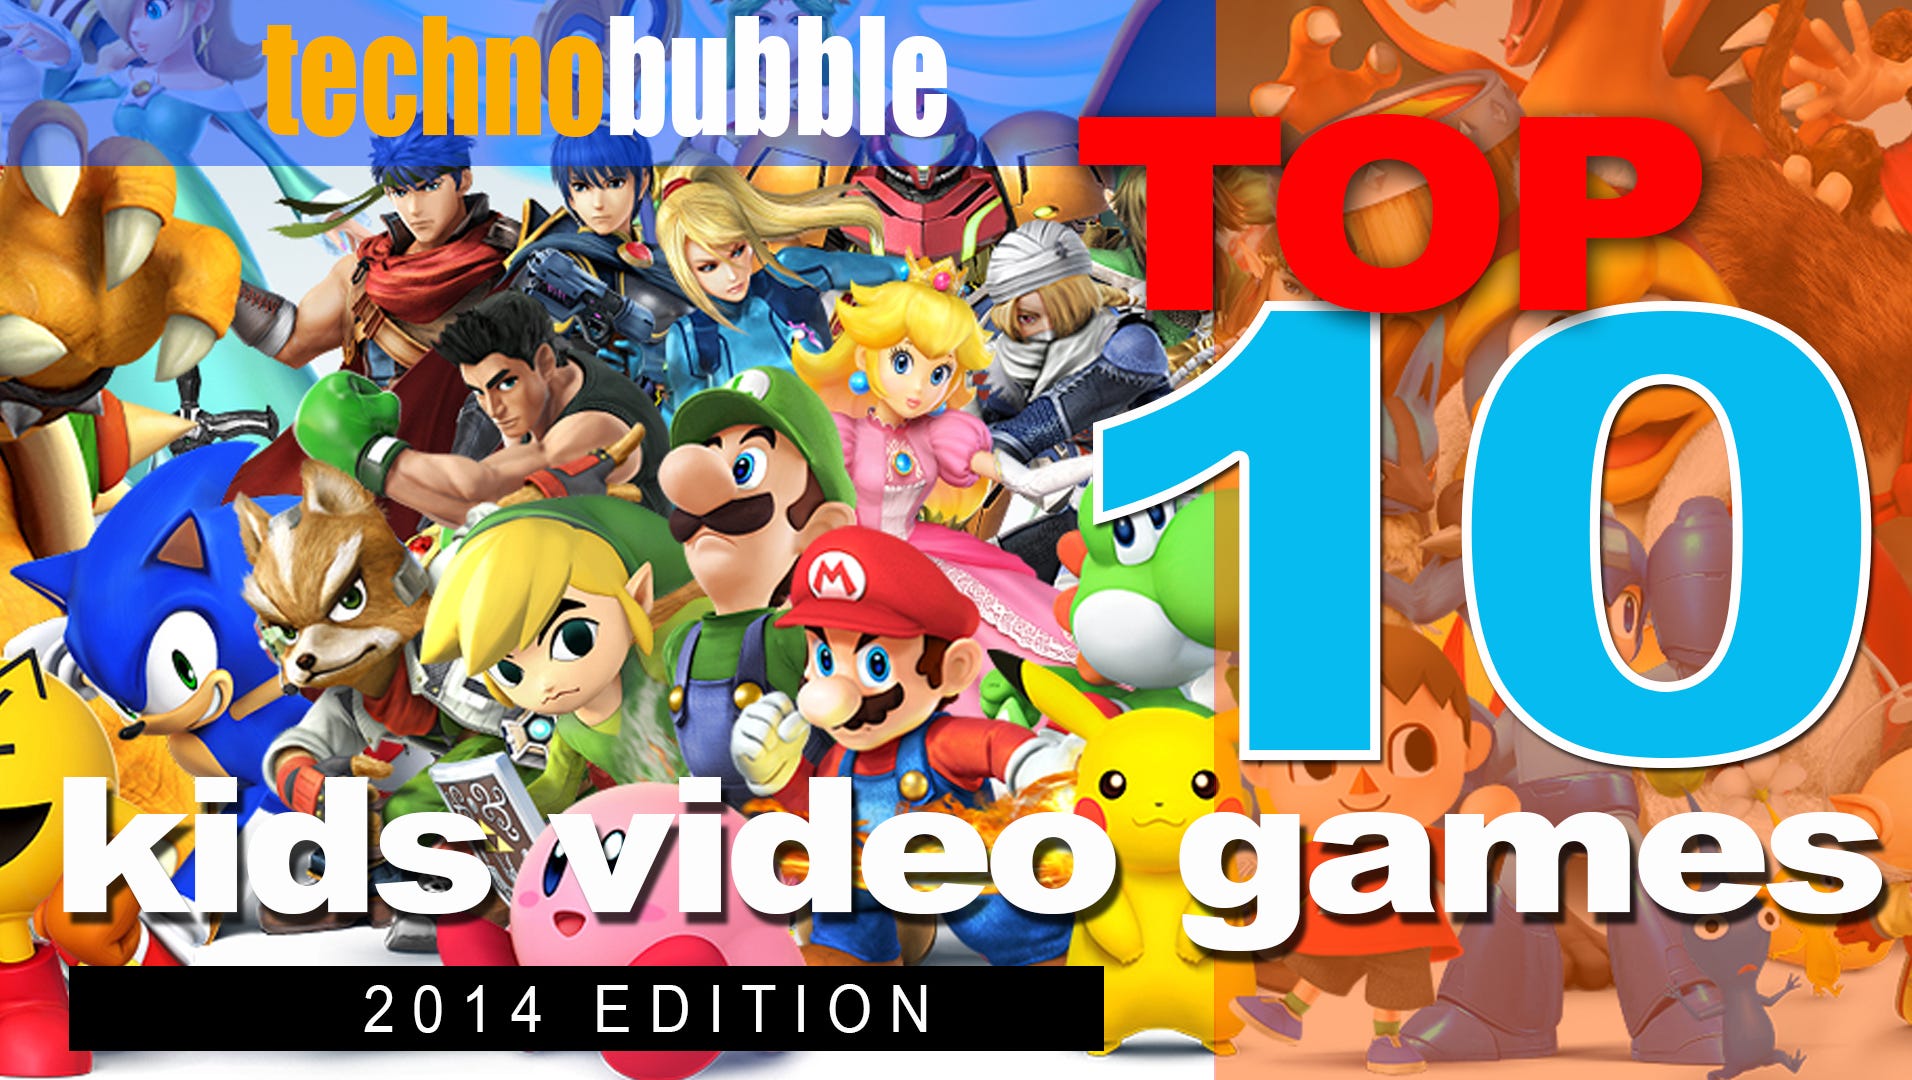 Top 10 console for kids in 2014 | Technobubble